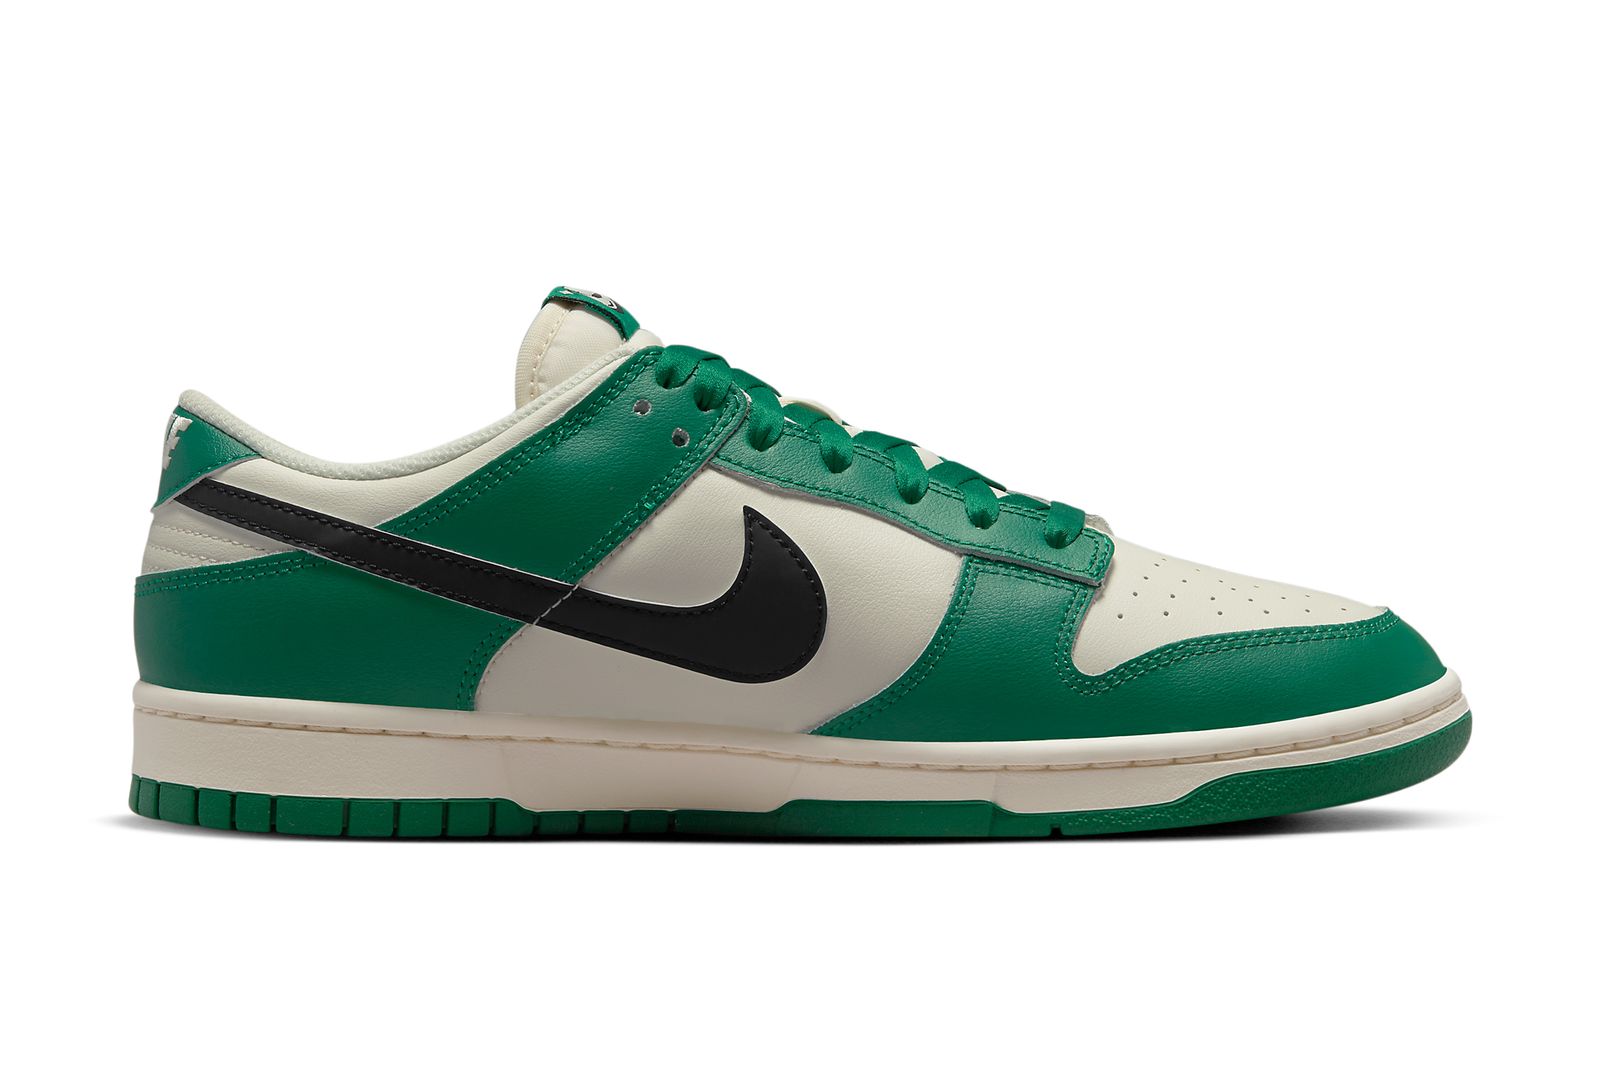 Hit the Jackpot With This Lotto-Inspired Nike Dunk Low - Sneaker Freaker